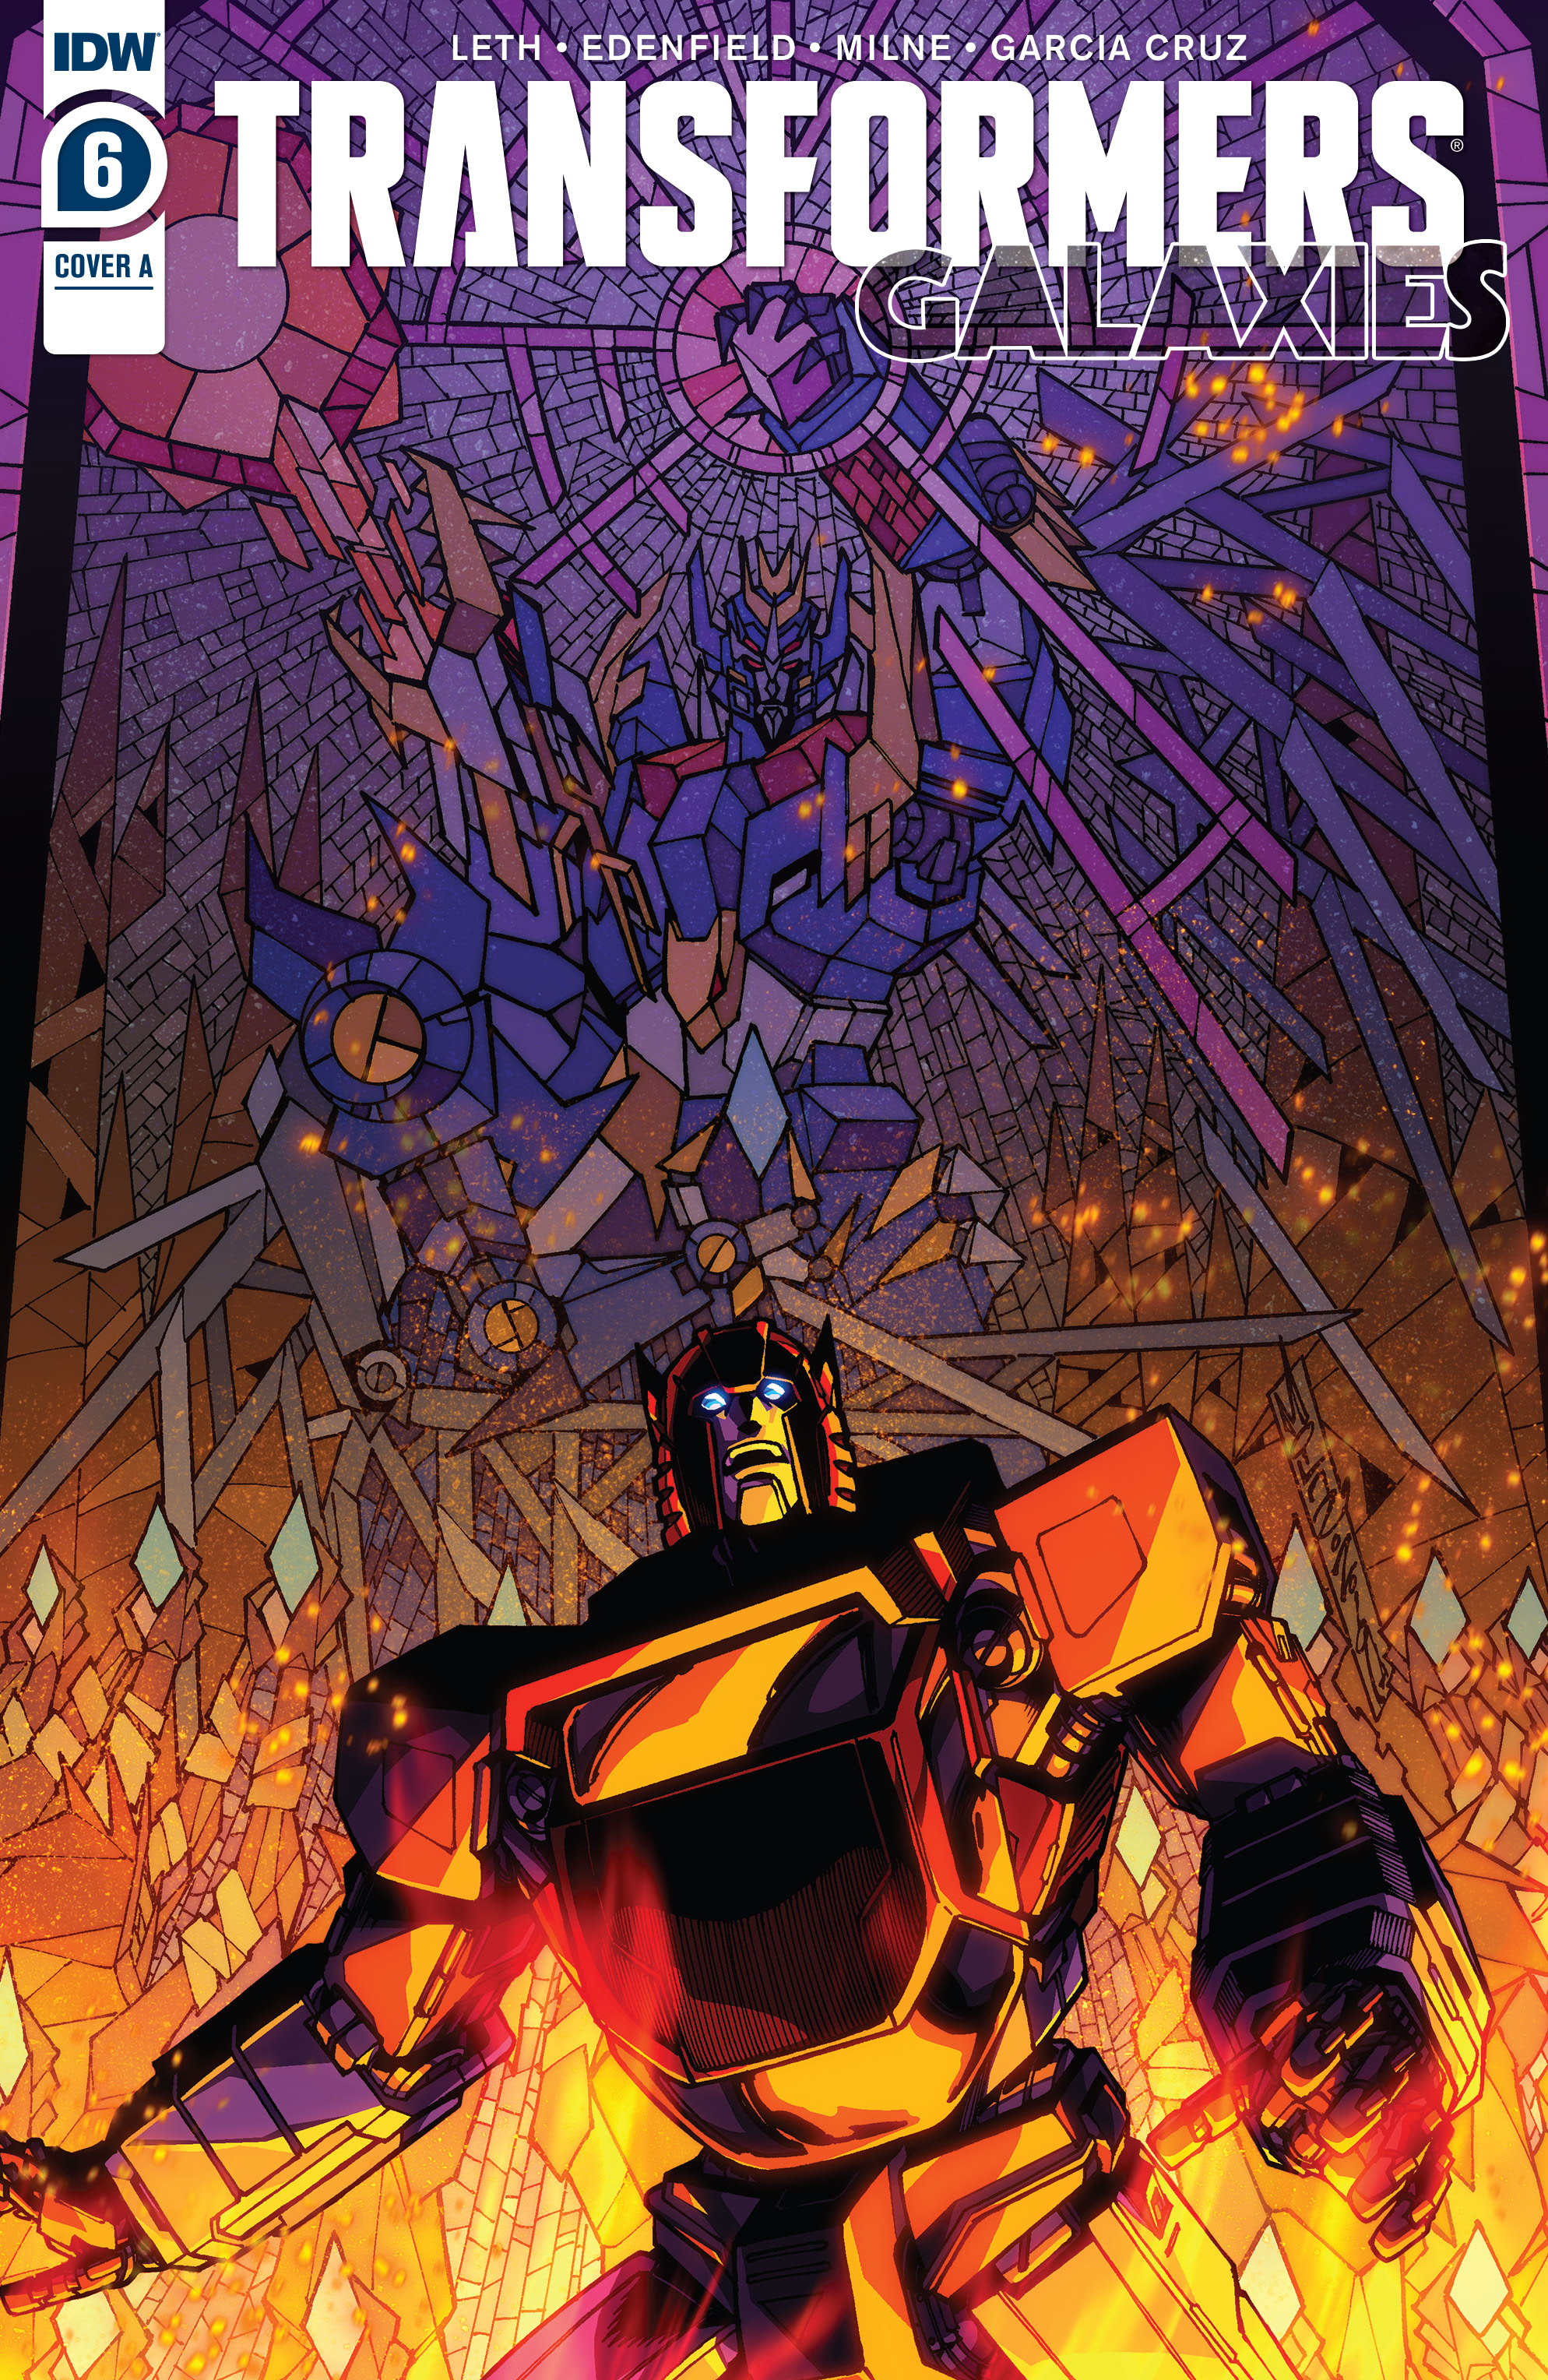 Read online Transformers: Galaxies comic -  Issue #6 - 1